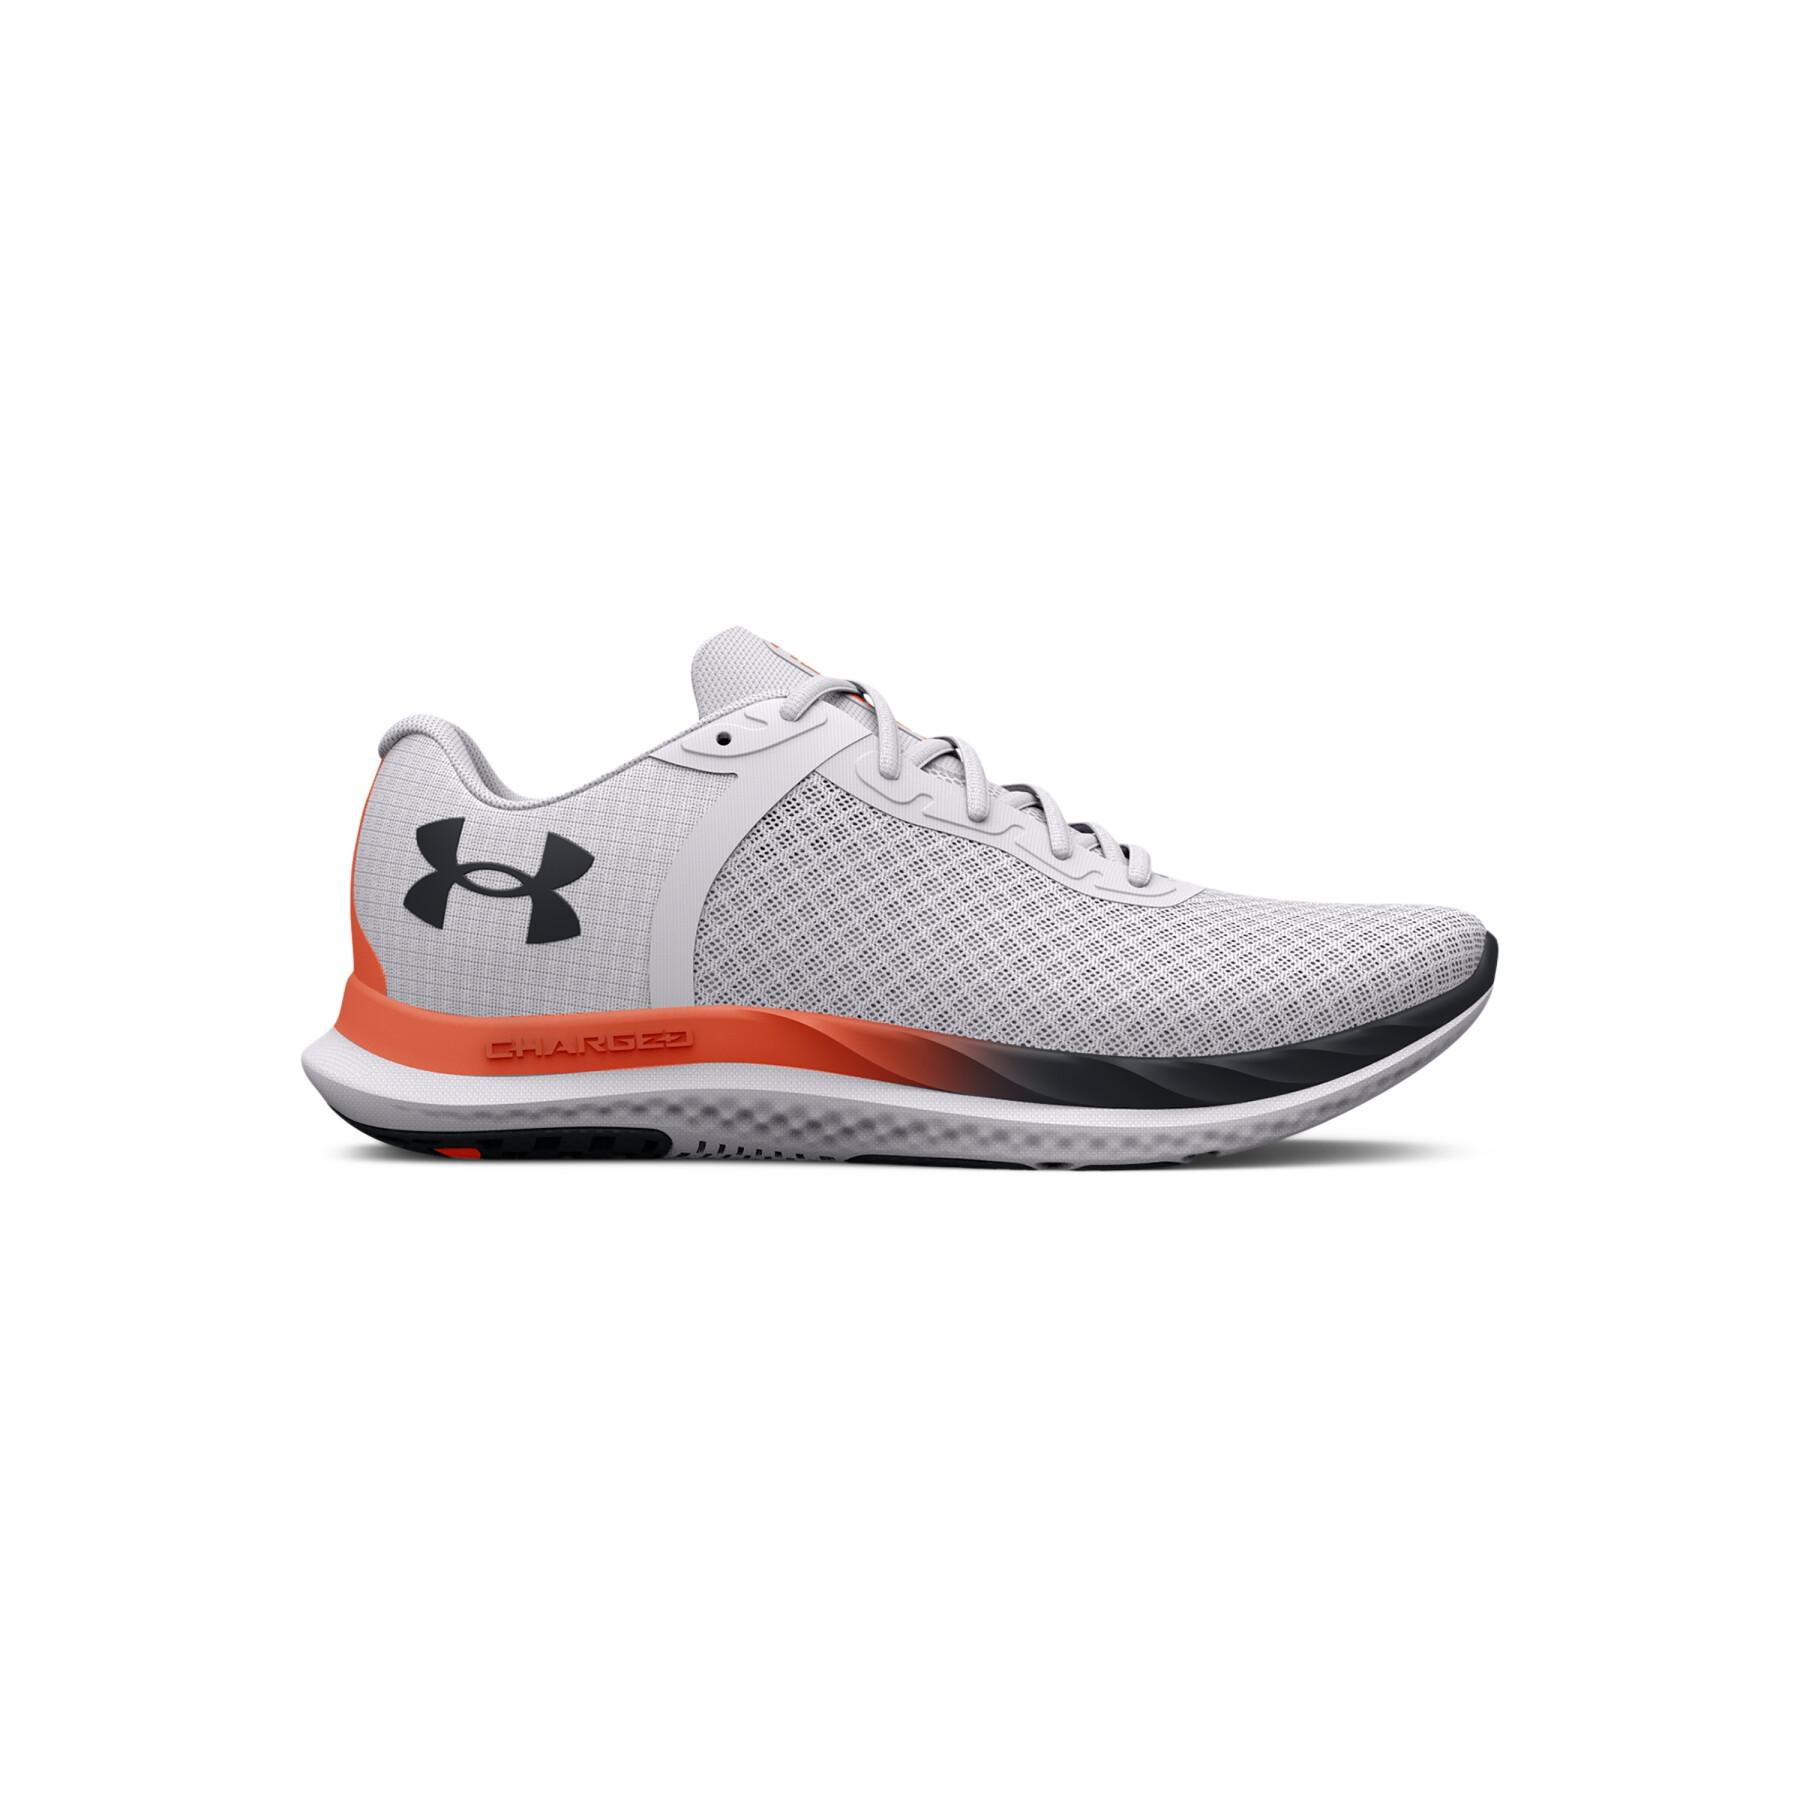 Chaussures de running Under Armour Charged Breeze